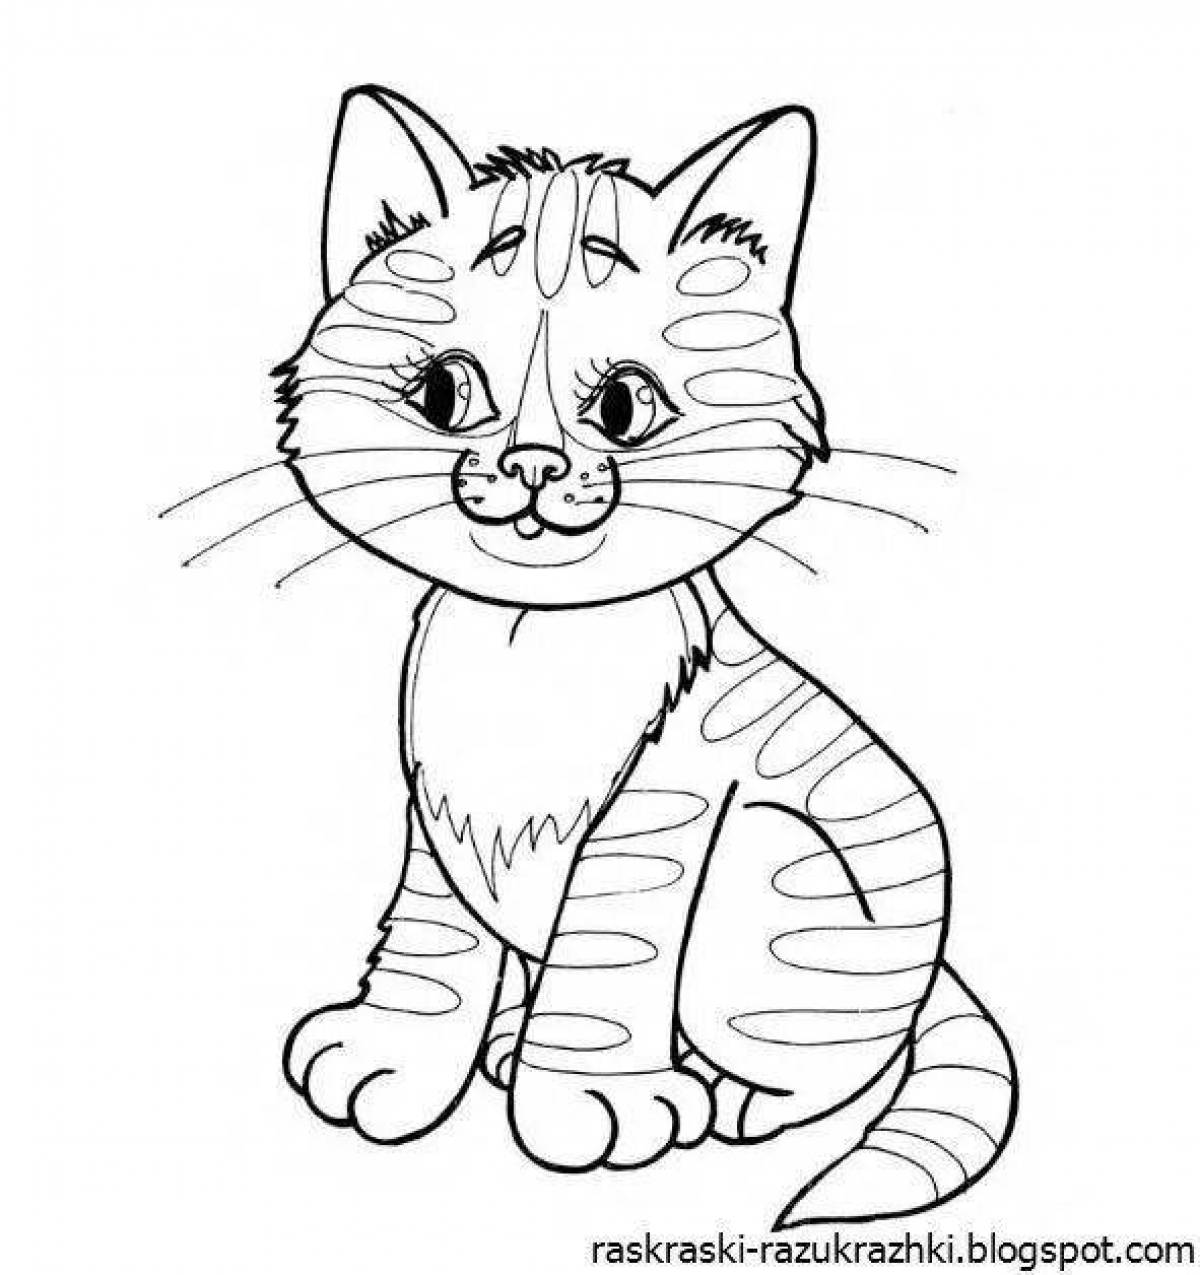 Live kitten coloring for children 3-4 years old